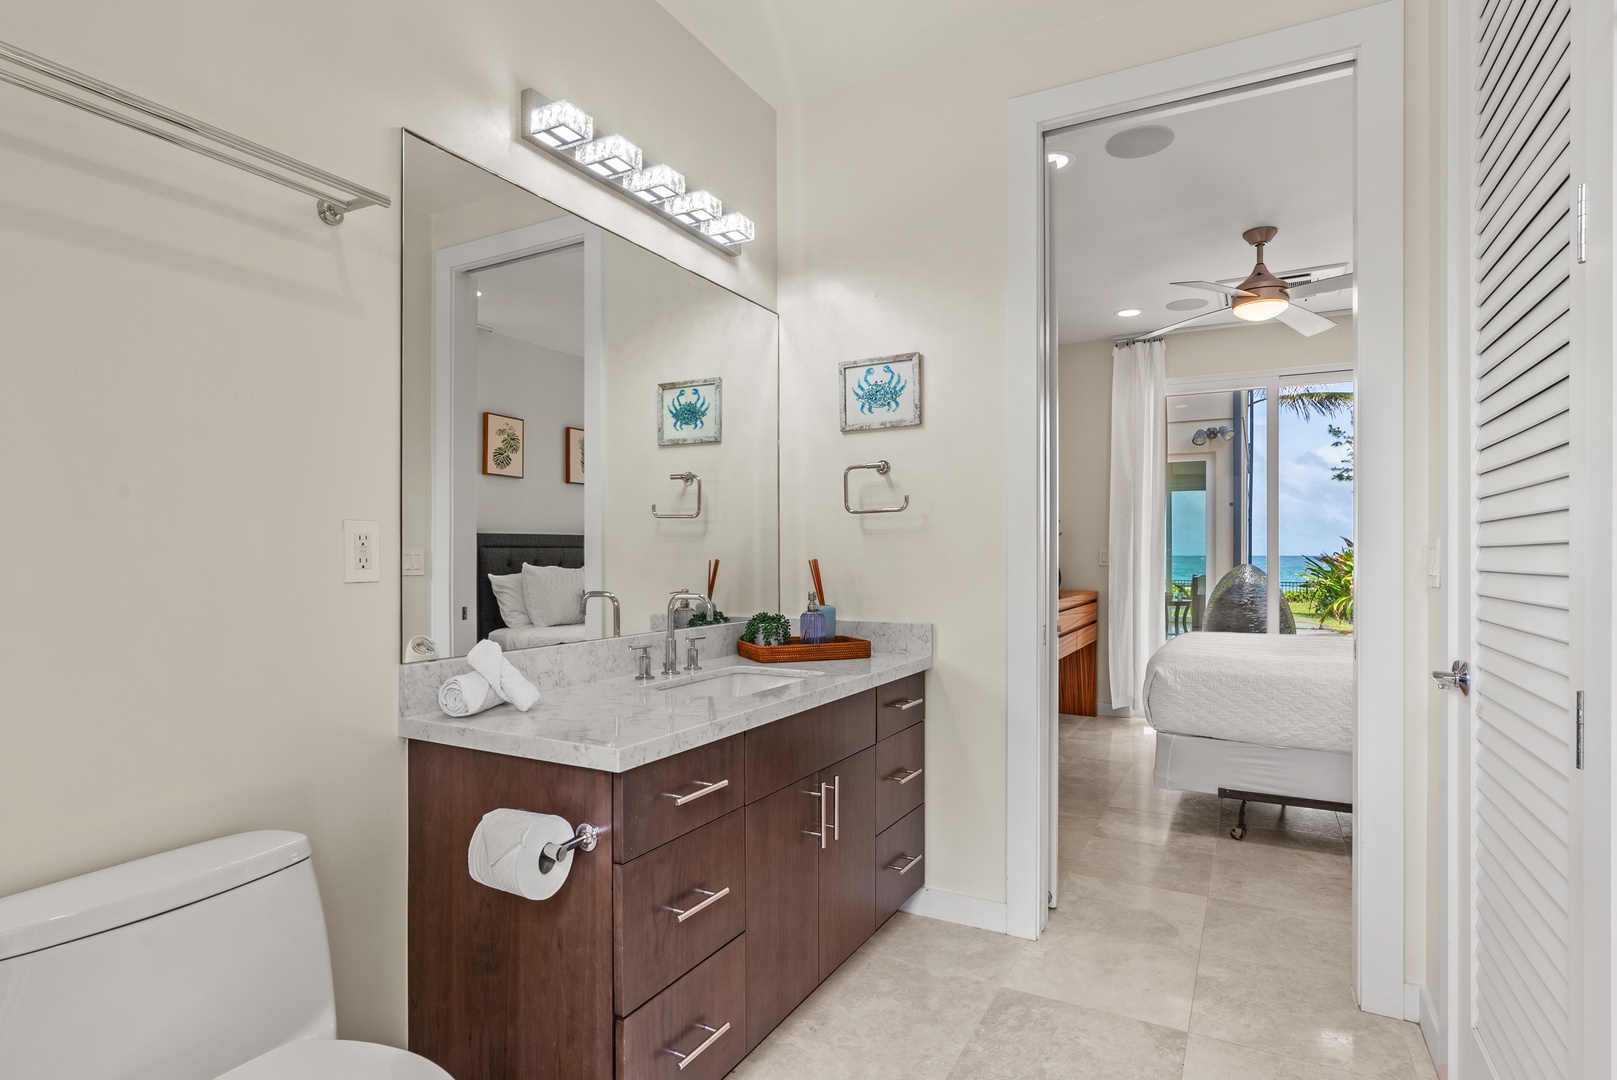 Laie Vacation Rentals, Laie Beachfront Estate - The ensuite bathroom has ample vanity space and an outdoor shower.